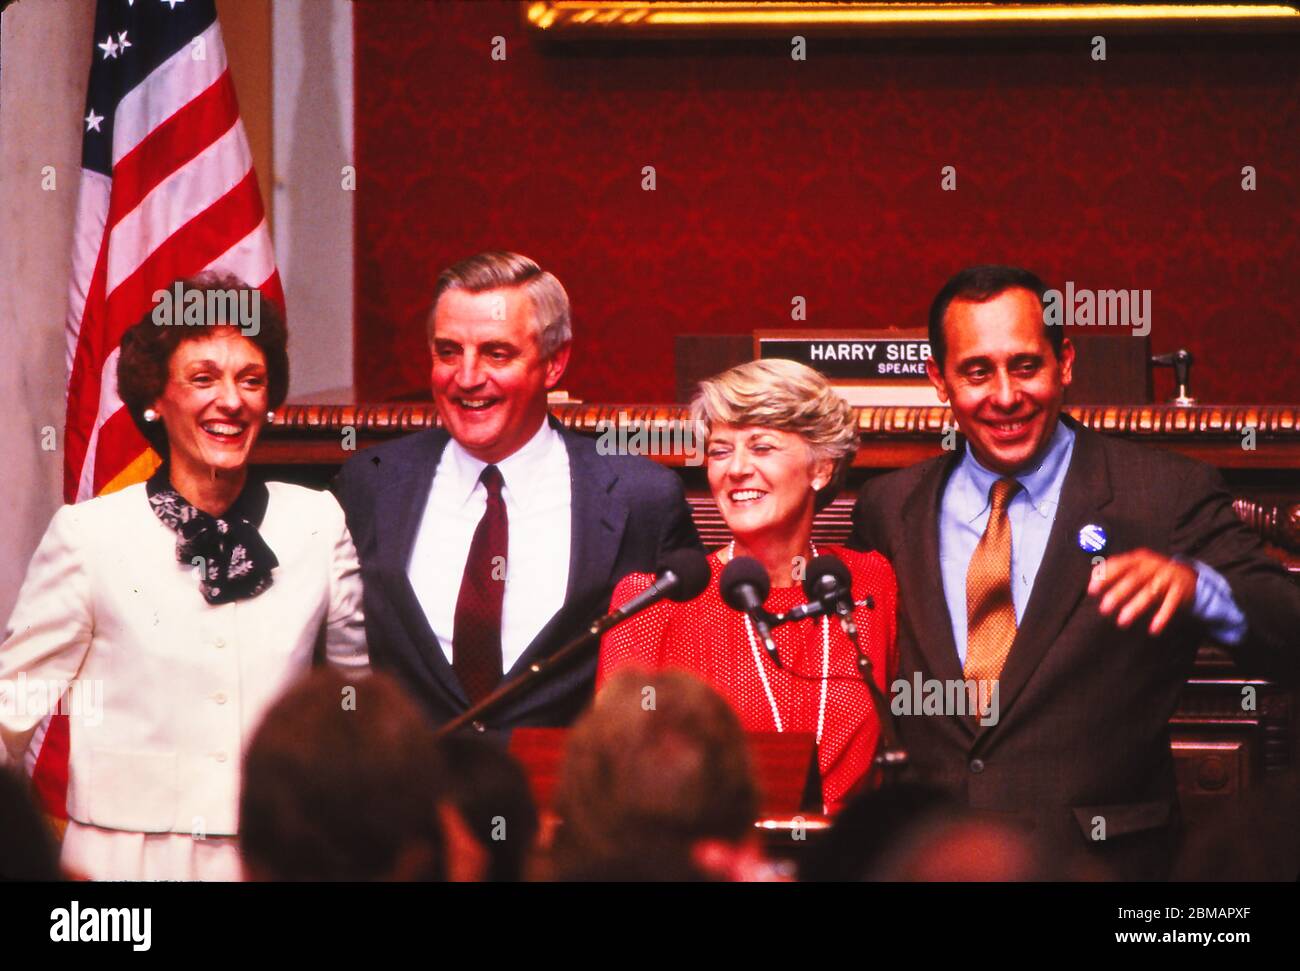 Presidential Candidate Walter Mondale, with Vice-Presidential Candidate Geraldine Ferraro, with their spouses, during their campaign in 1984 Stock Photo